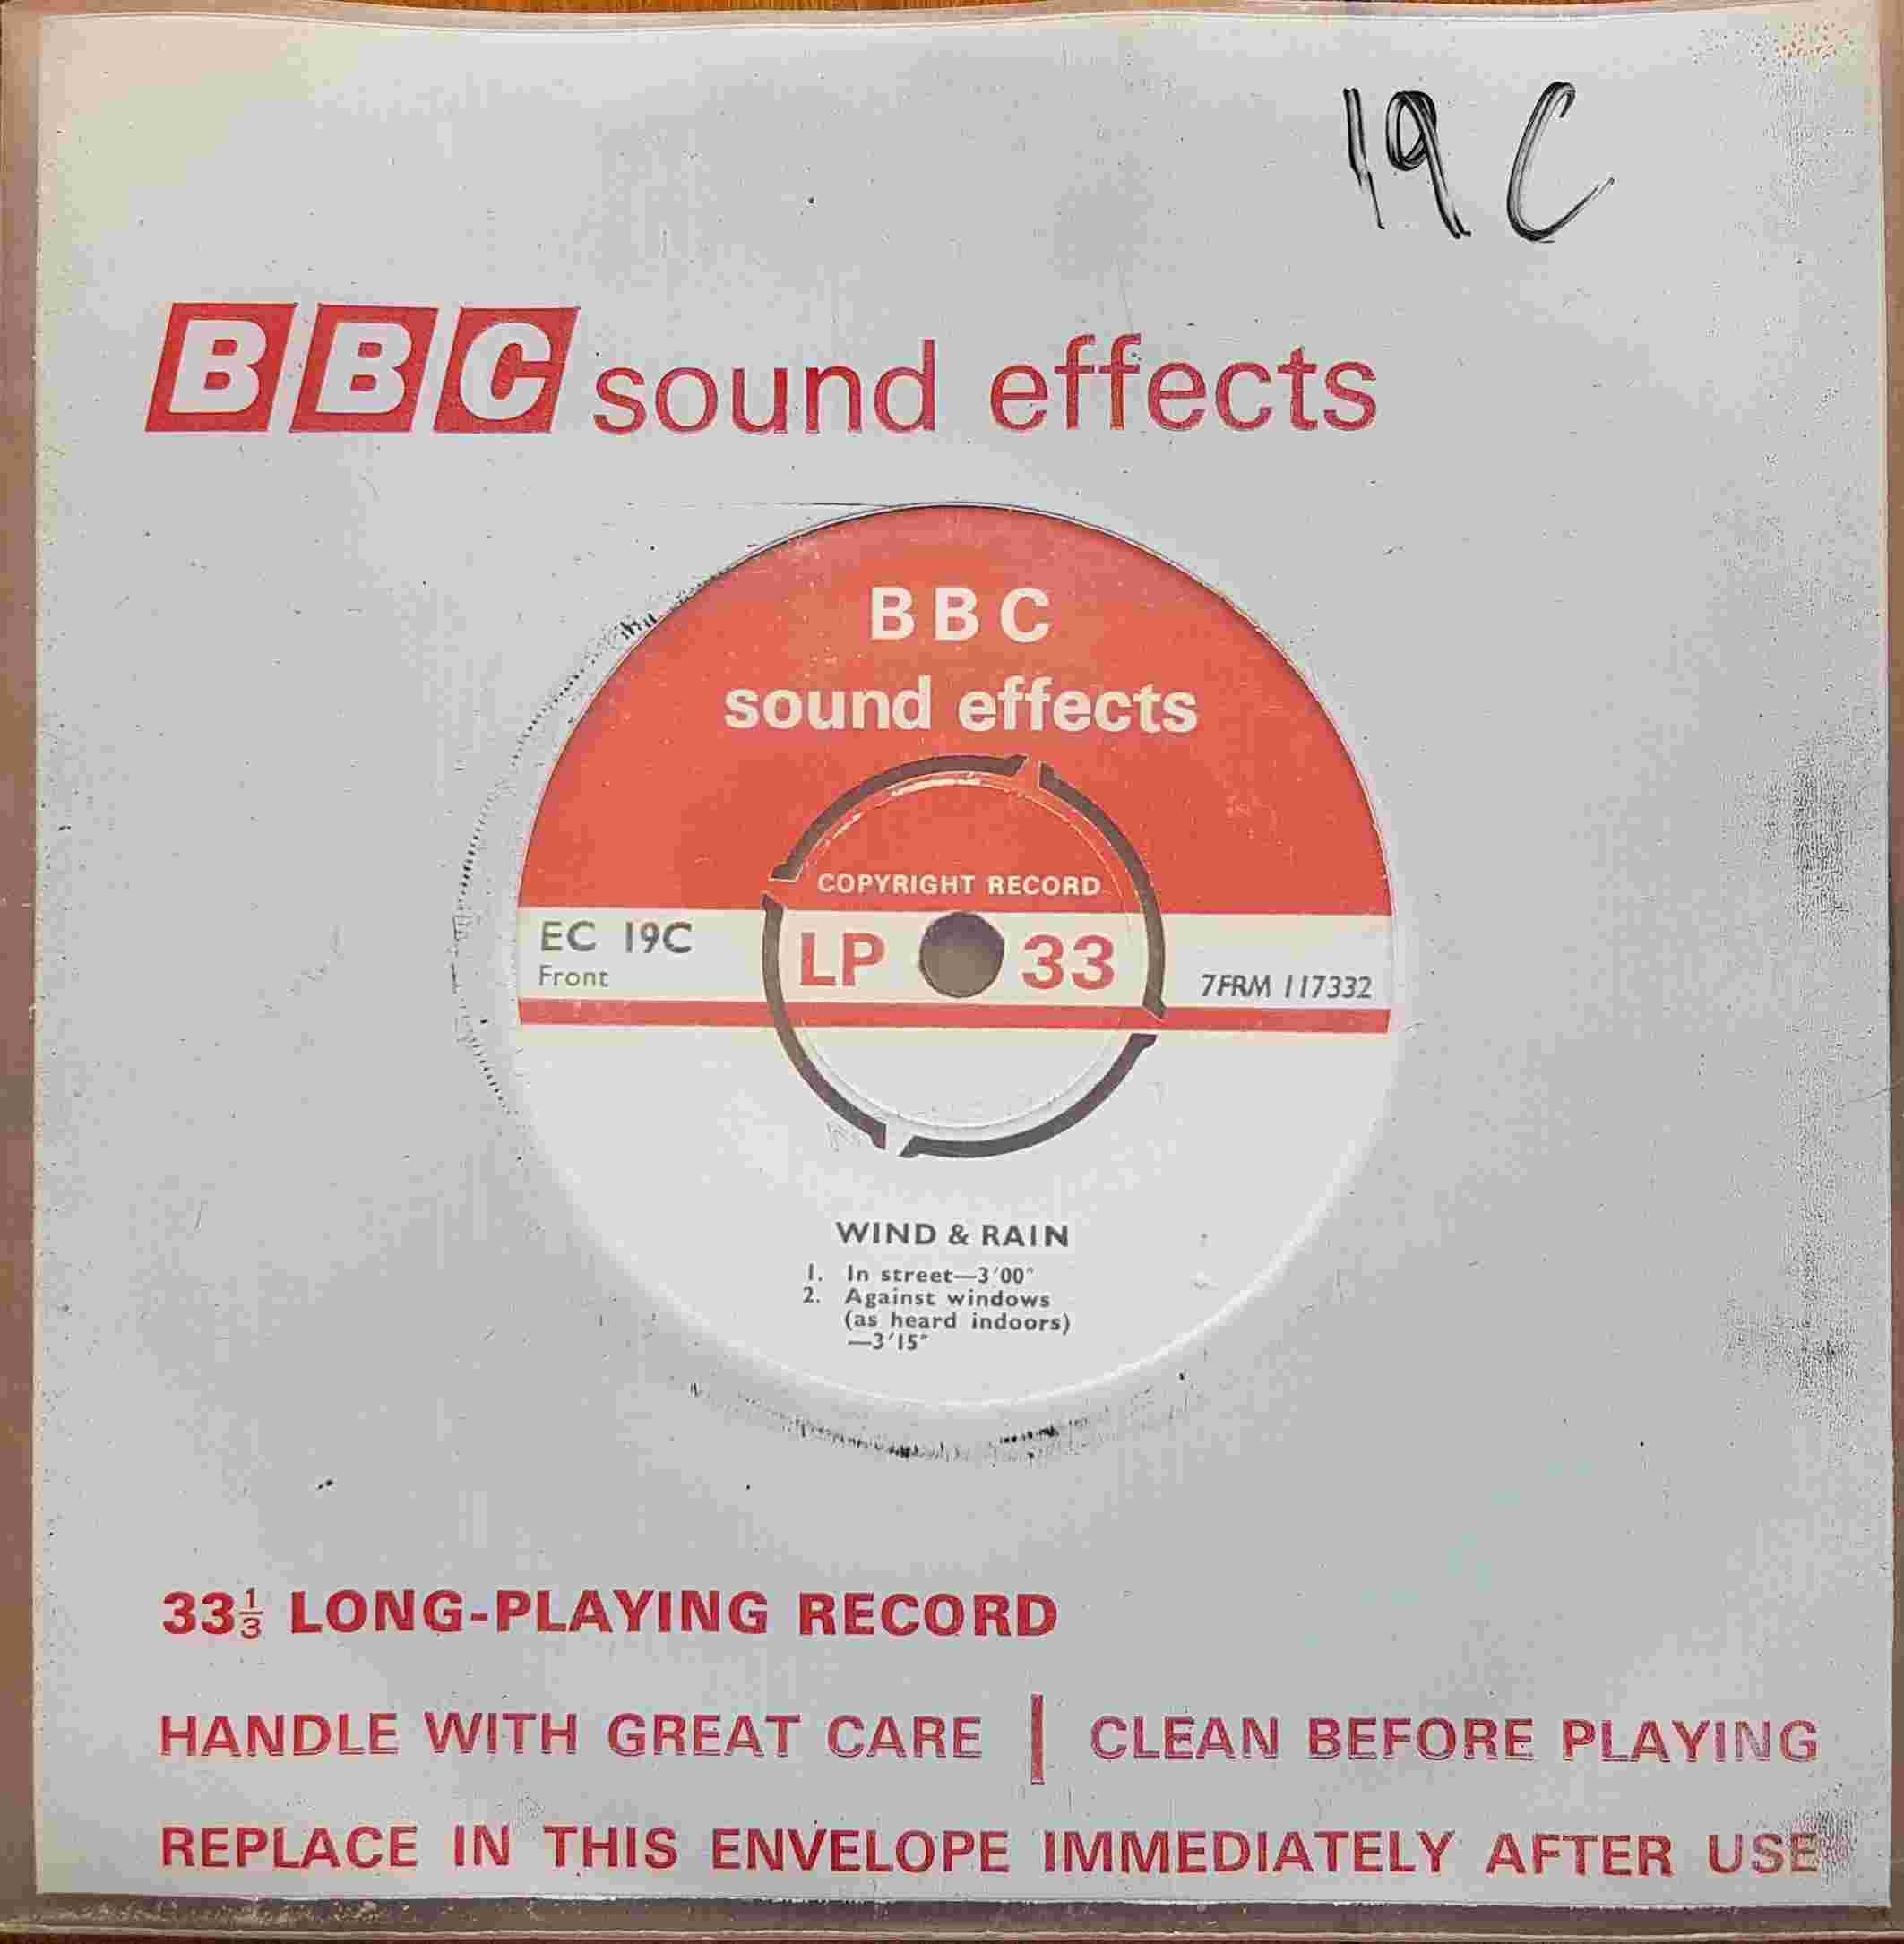 Picture of EC 19C Rain by artist Not registered from the BBC records and Tapes library